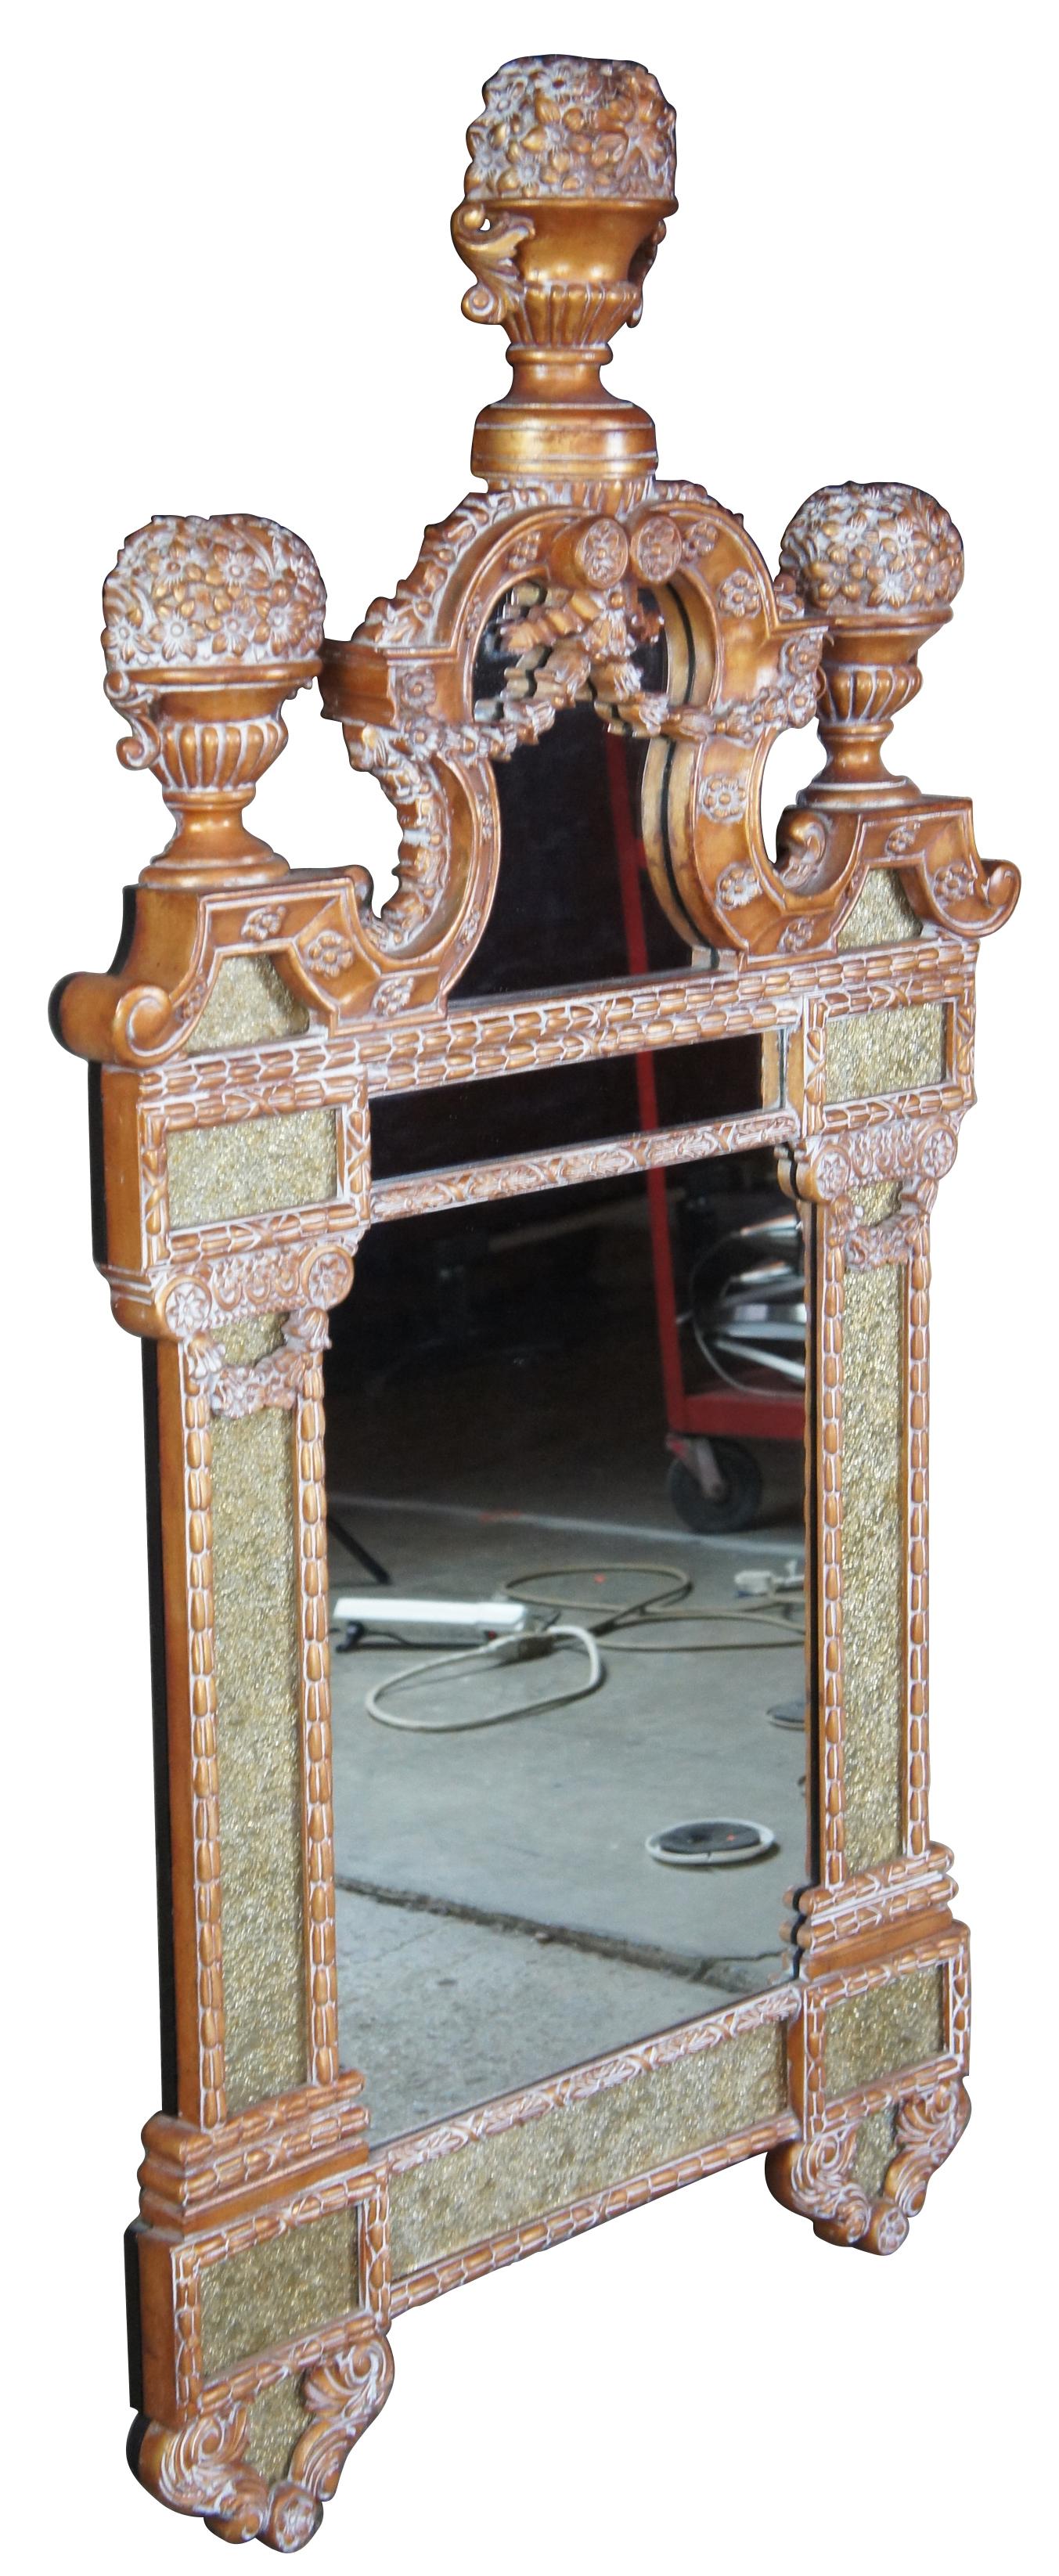 Maitland Smith decorative floral mirror with urn motif, features neoclassical styling with gold applied panels and carved detail throughout. Measure: 61